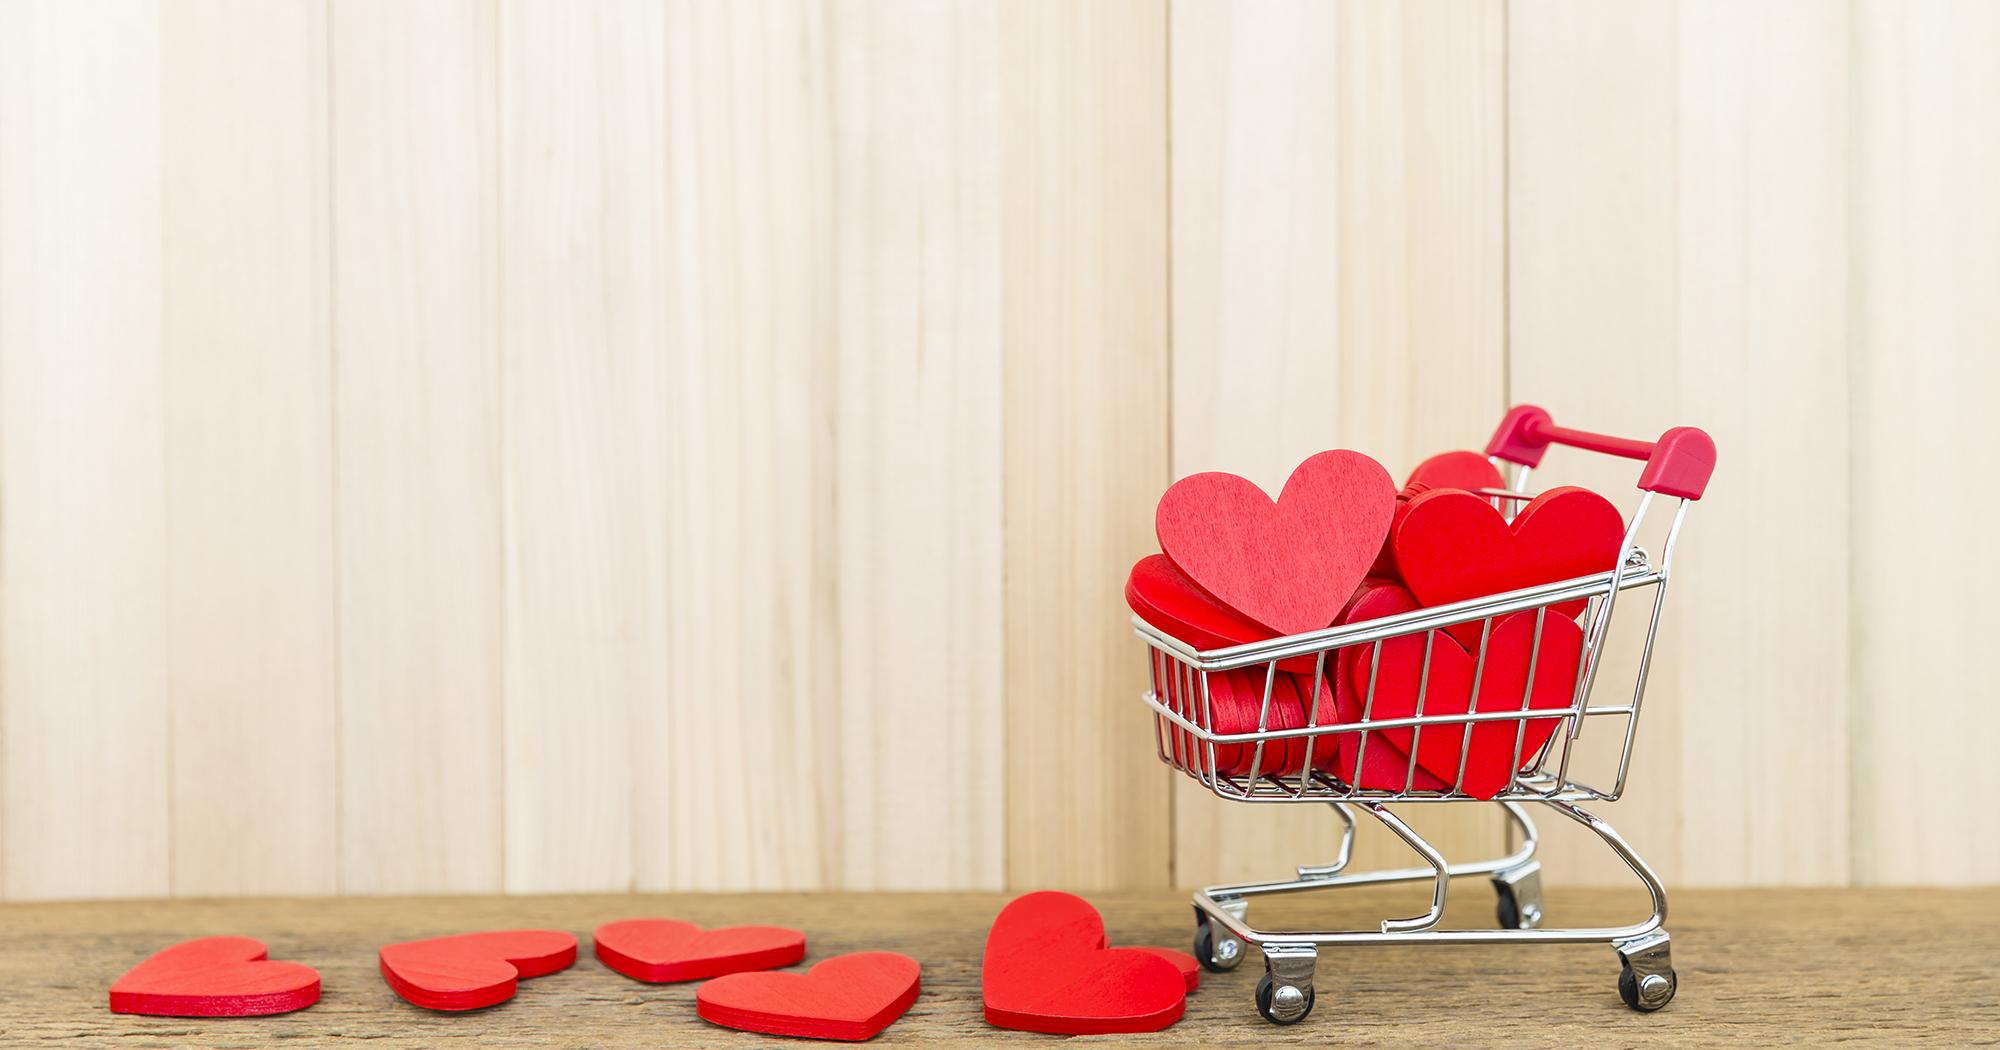 8 Retail Loyalty Programs to Max Customer Retention (Types, Examples & Tools)